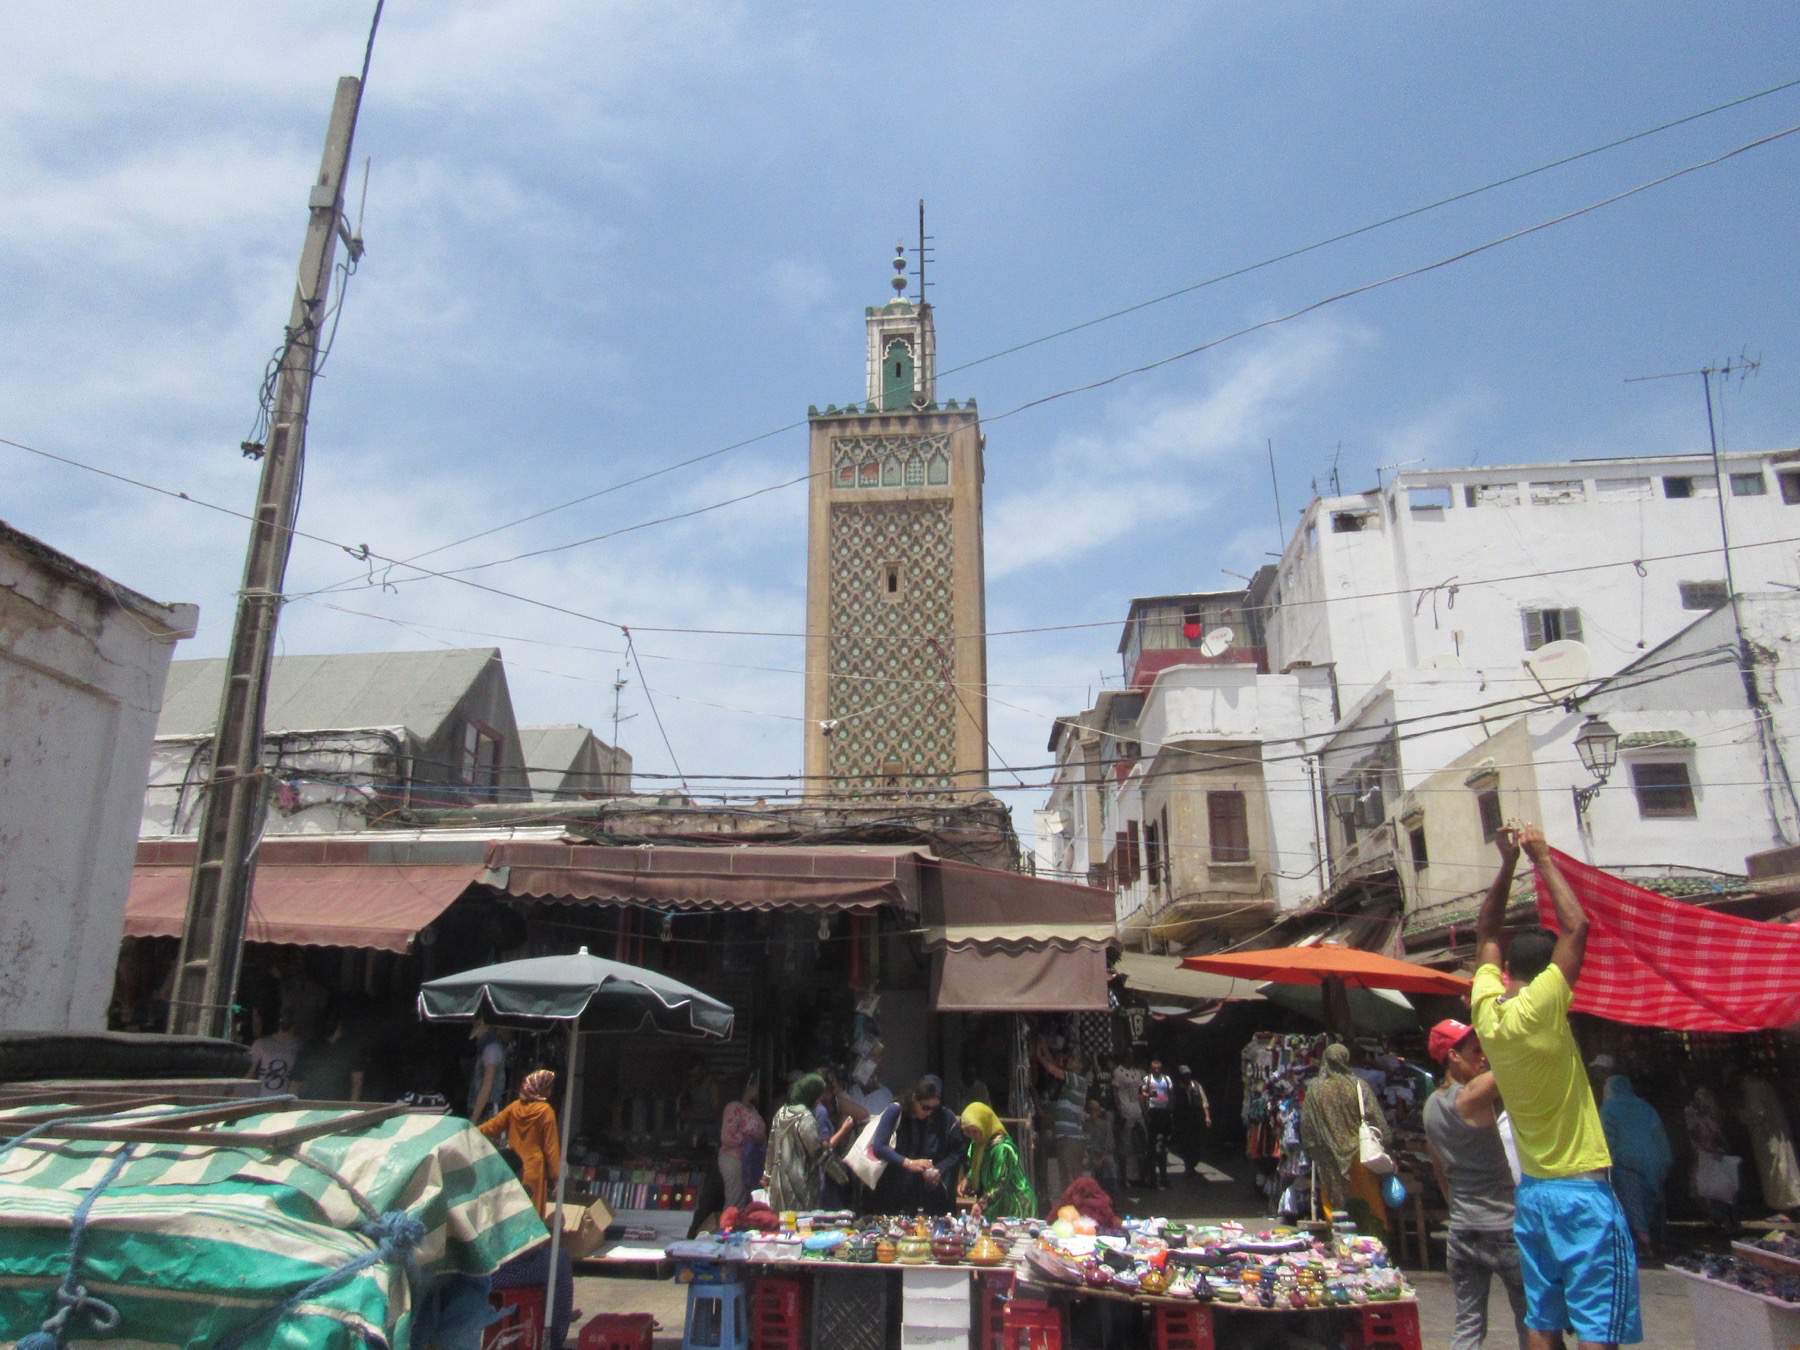 View of the market square with the minaret in the background.